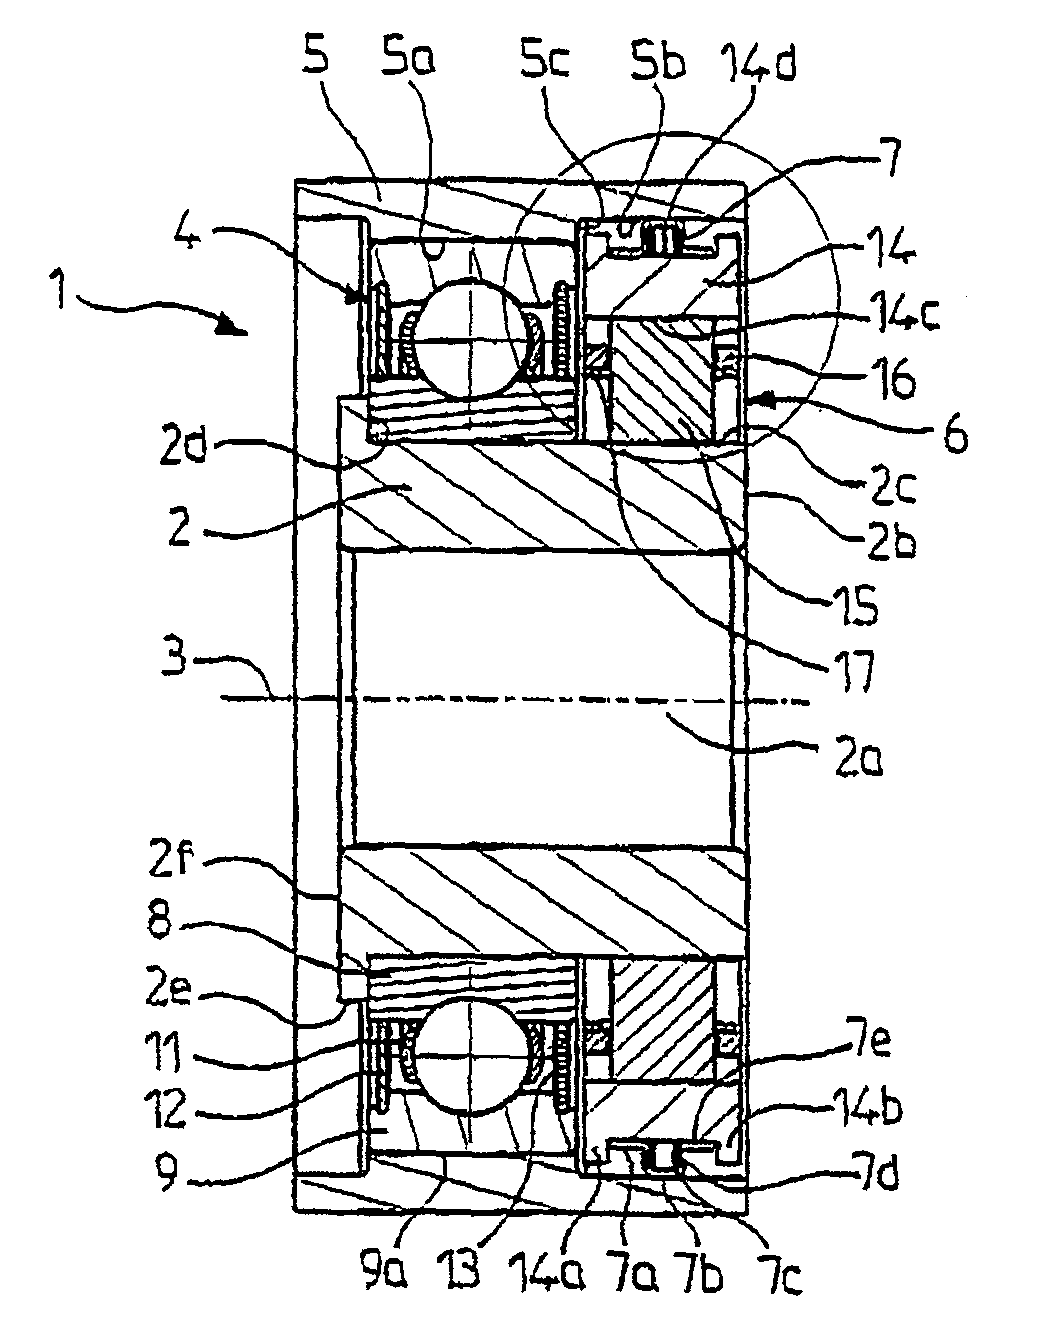 Freewheel bearing device with torque limiter